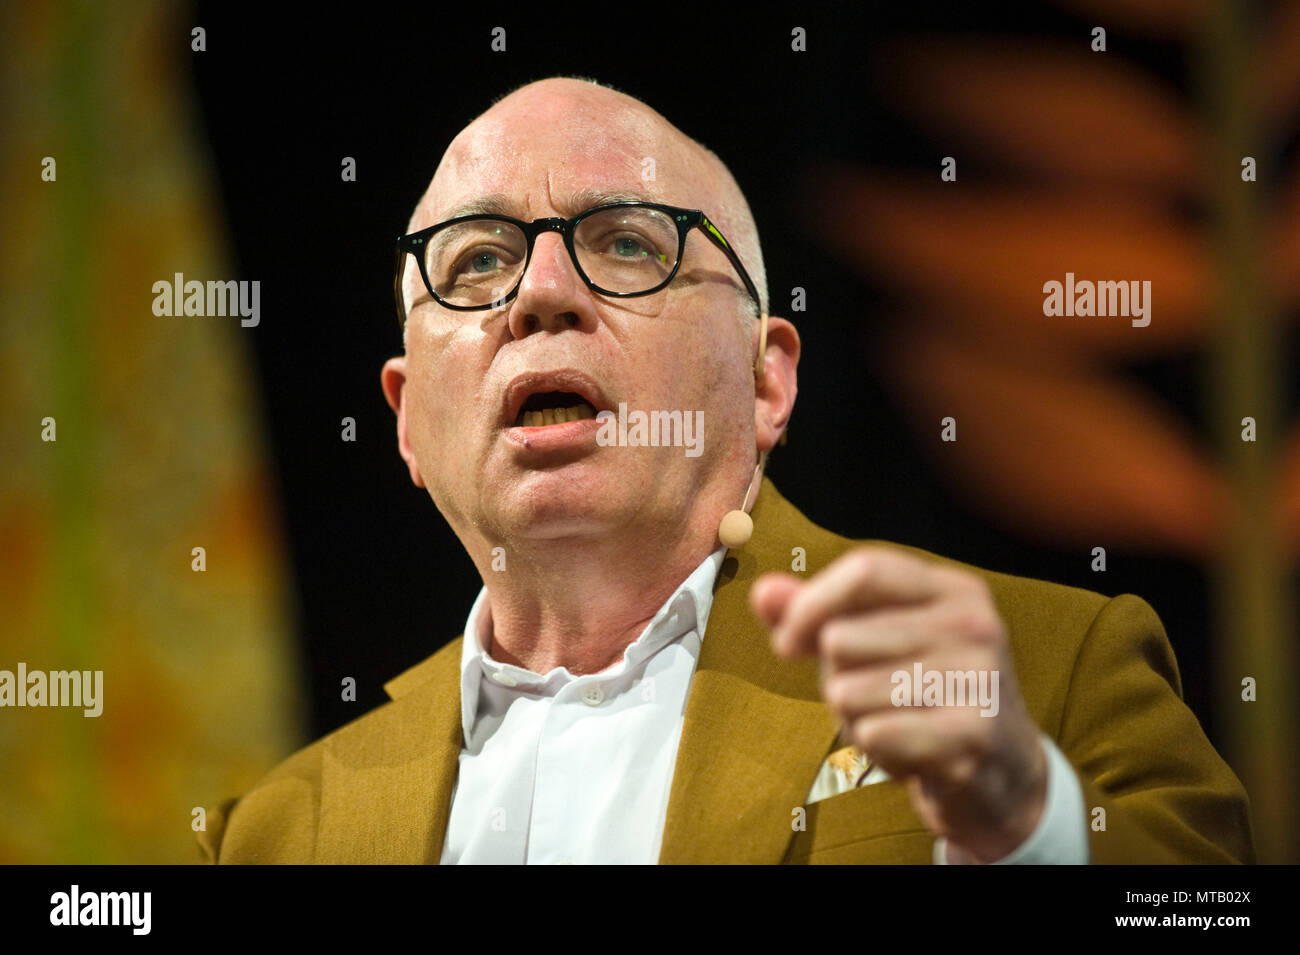 Michael Wolff journalist & author of Fire and Fury, detailing the chaos of the Trump White House, speaking on stage at Hay Festival 2018 Hay-on-Wye Powys Wales UK Stock Photo